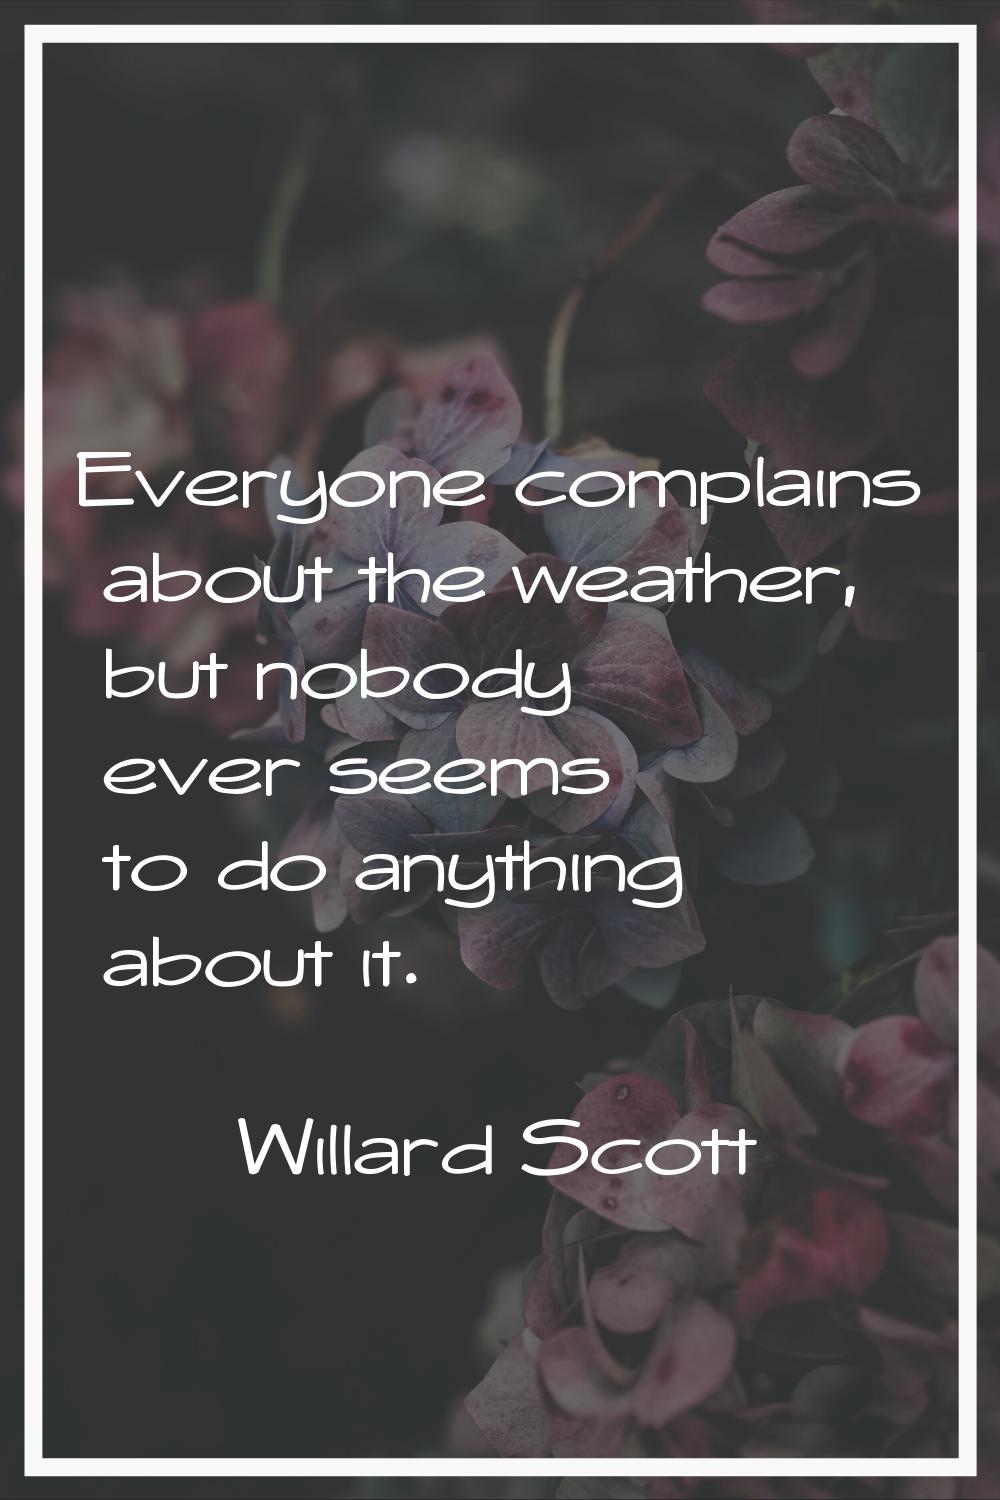 Everyone complains about the weather, but nobody ever seems to do anything about it.